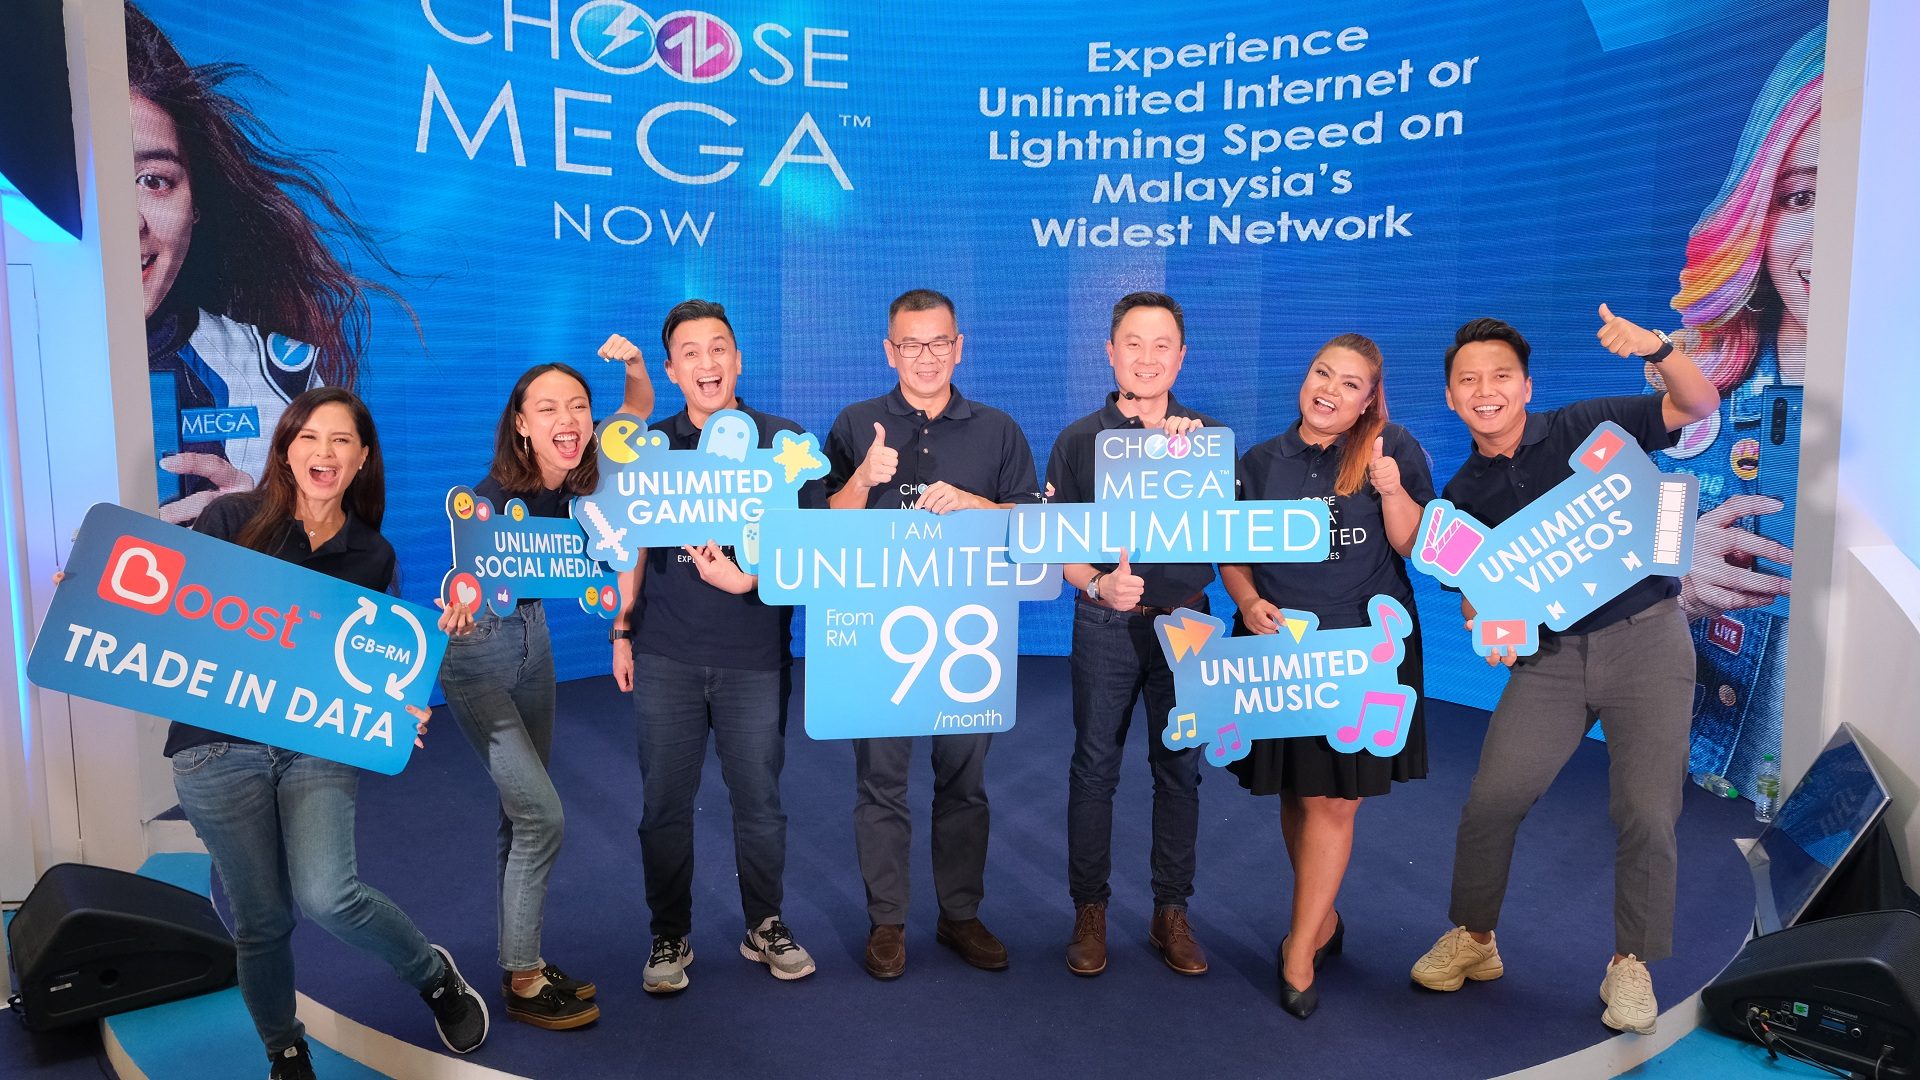 Plan 2021 phone with celcom postpaid